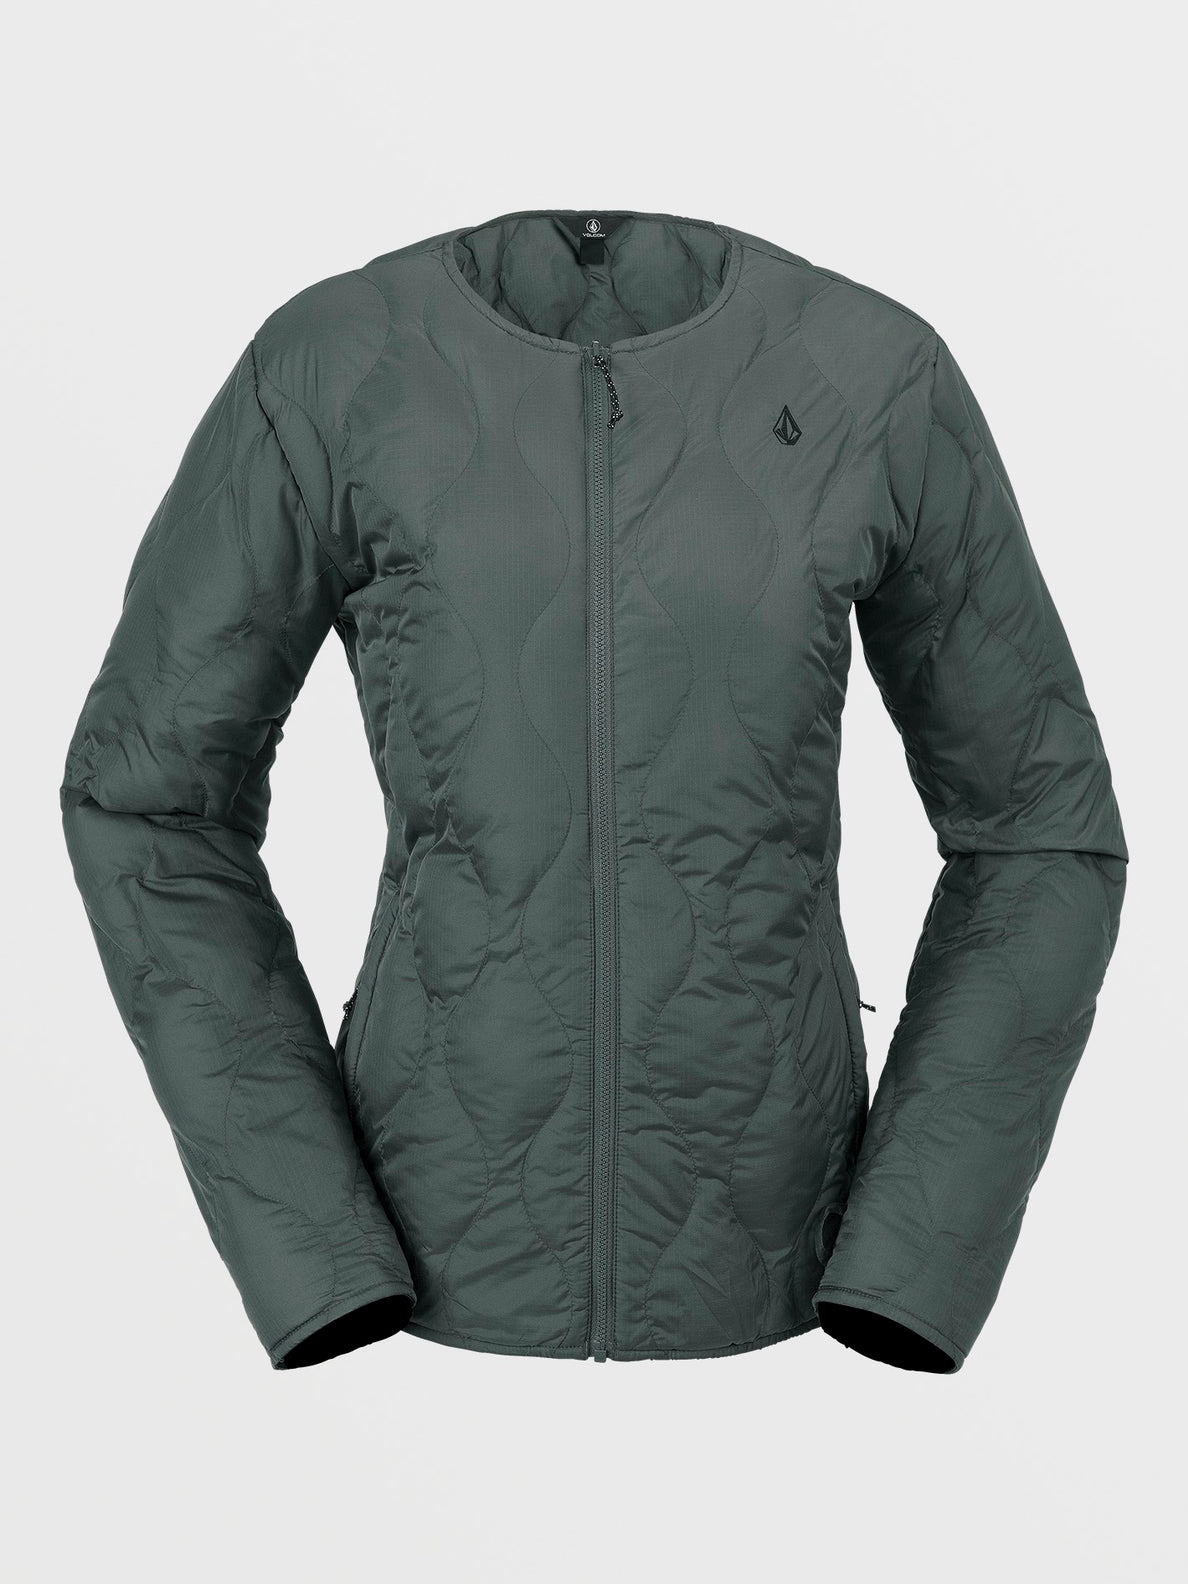 AW 3-IN-1 GORE-TEX JACKET - SAGE FROST (H0452401_SGF) [1]